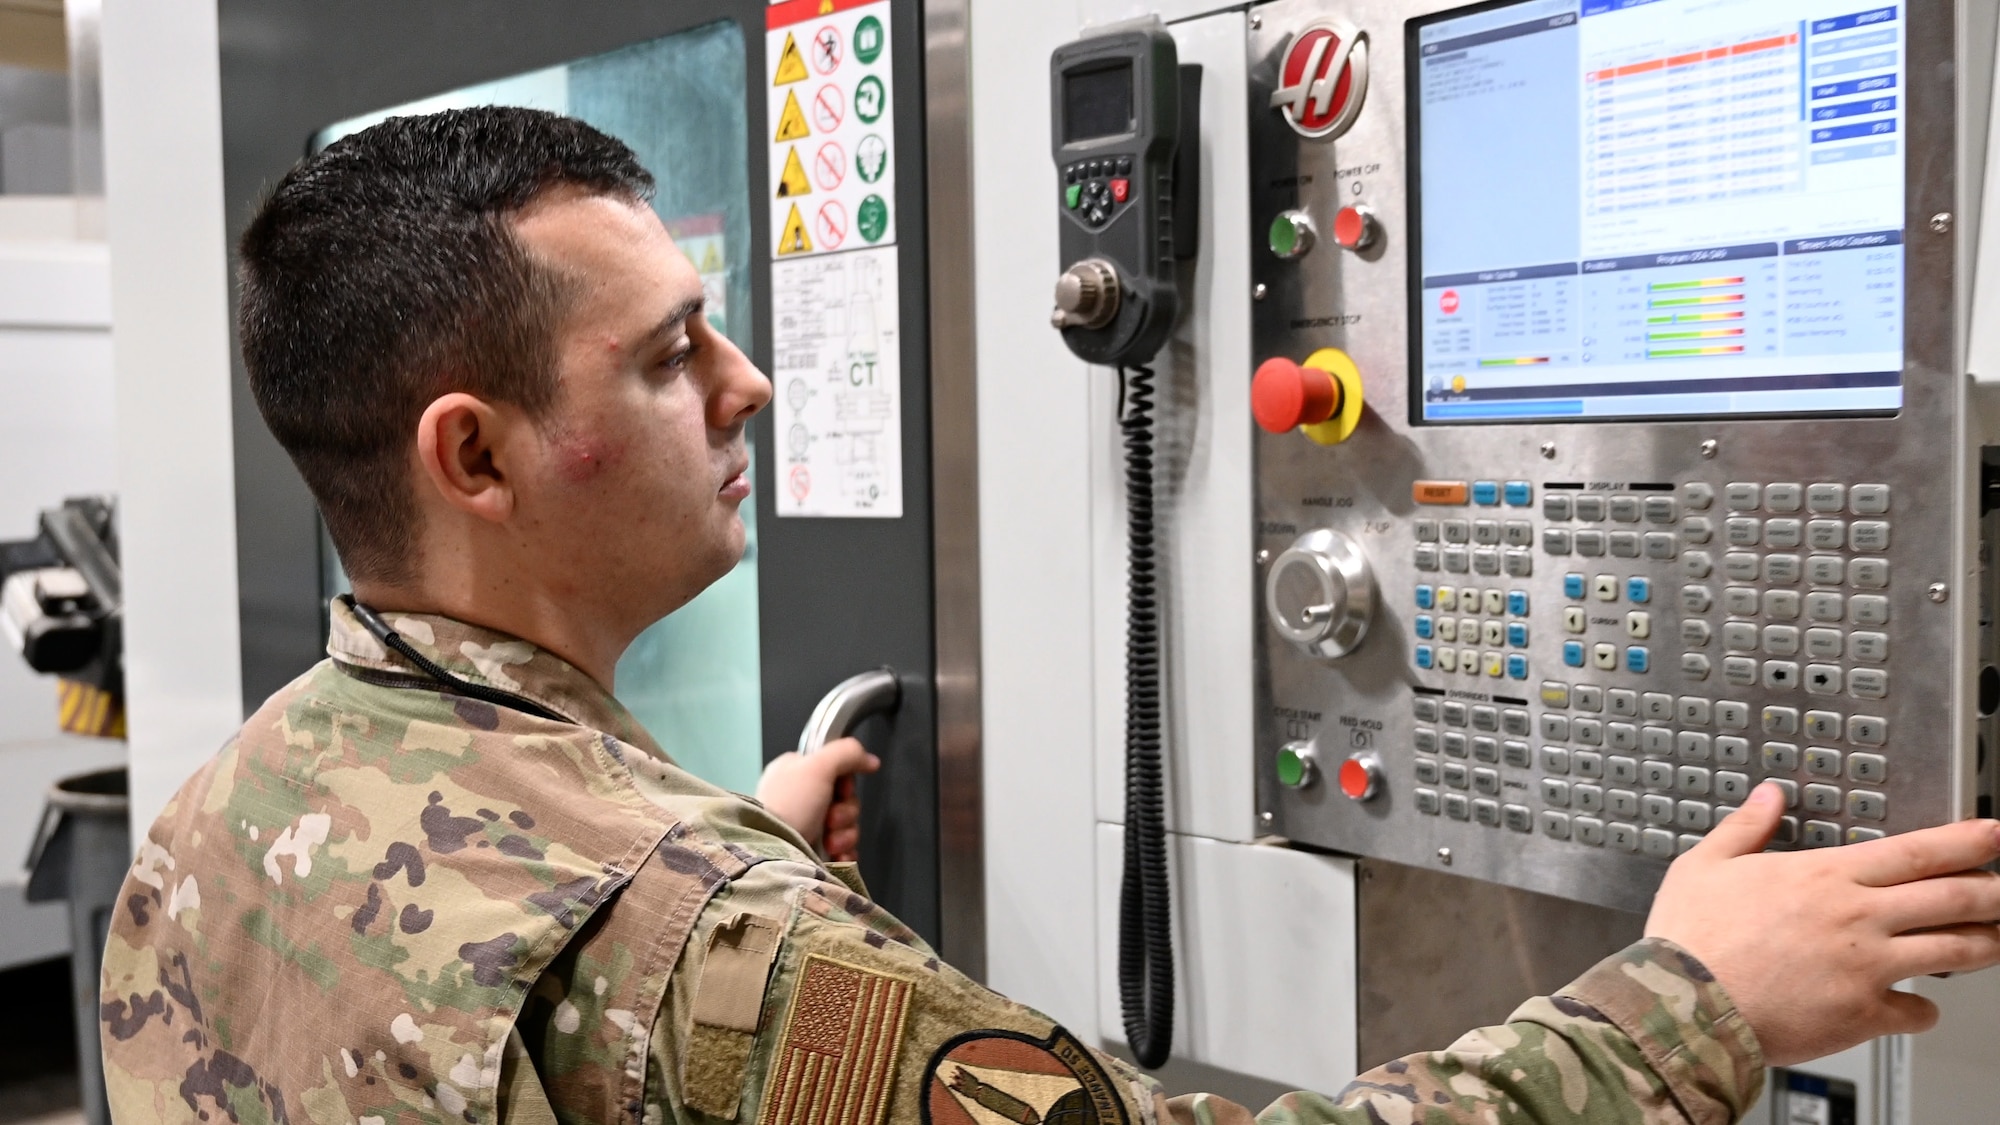 A man in uniform pushes a button on a machine.